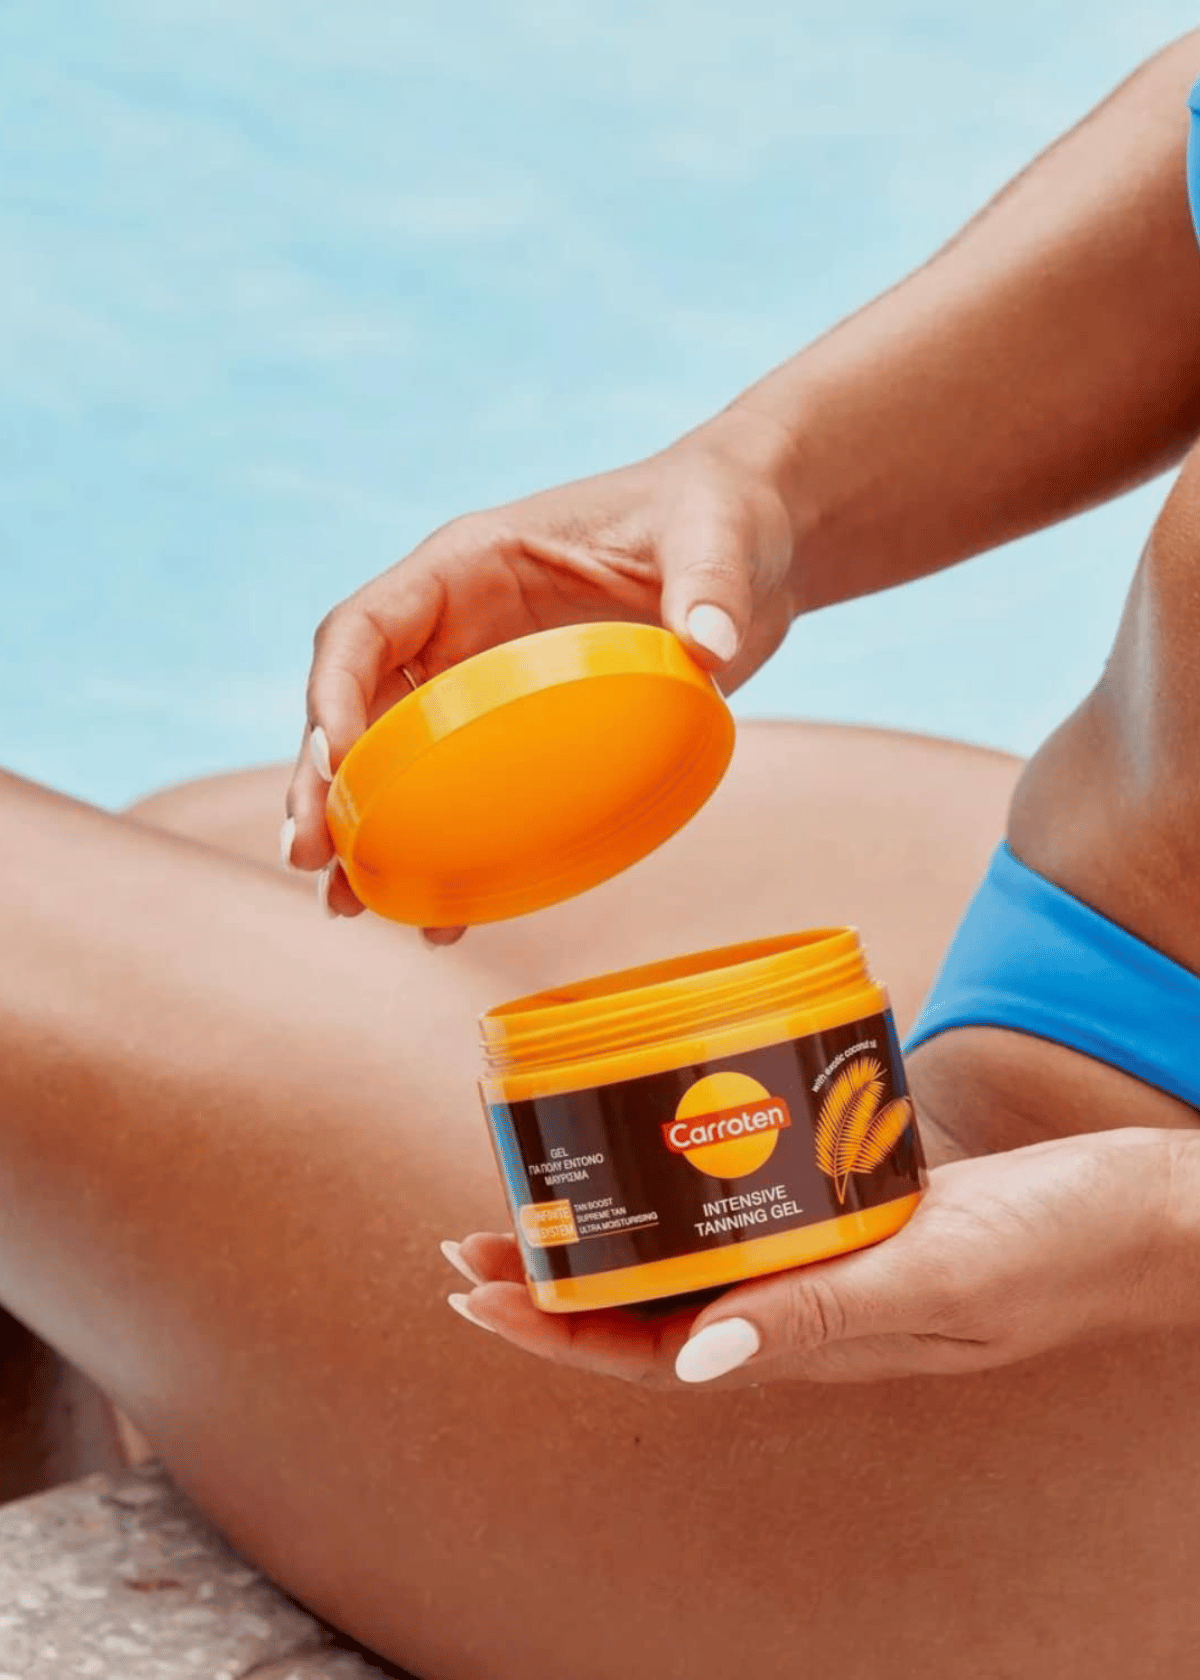 Carroten Intensive Tanning Gel Review: Ultimate Solution for a Deep and Natural Tan